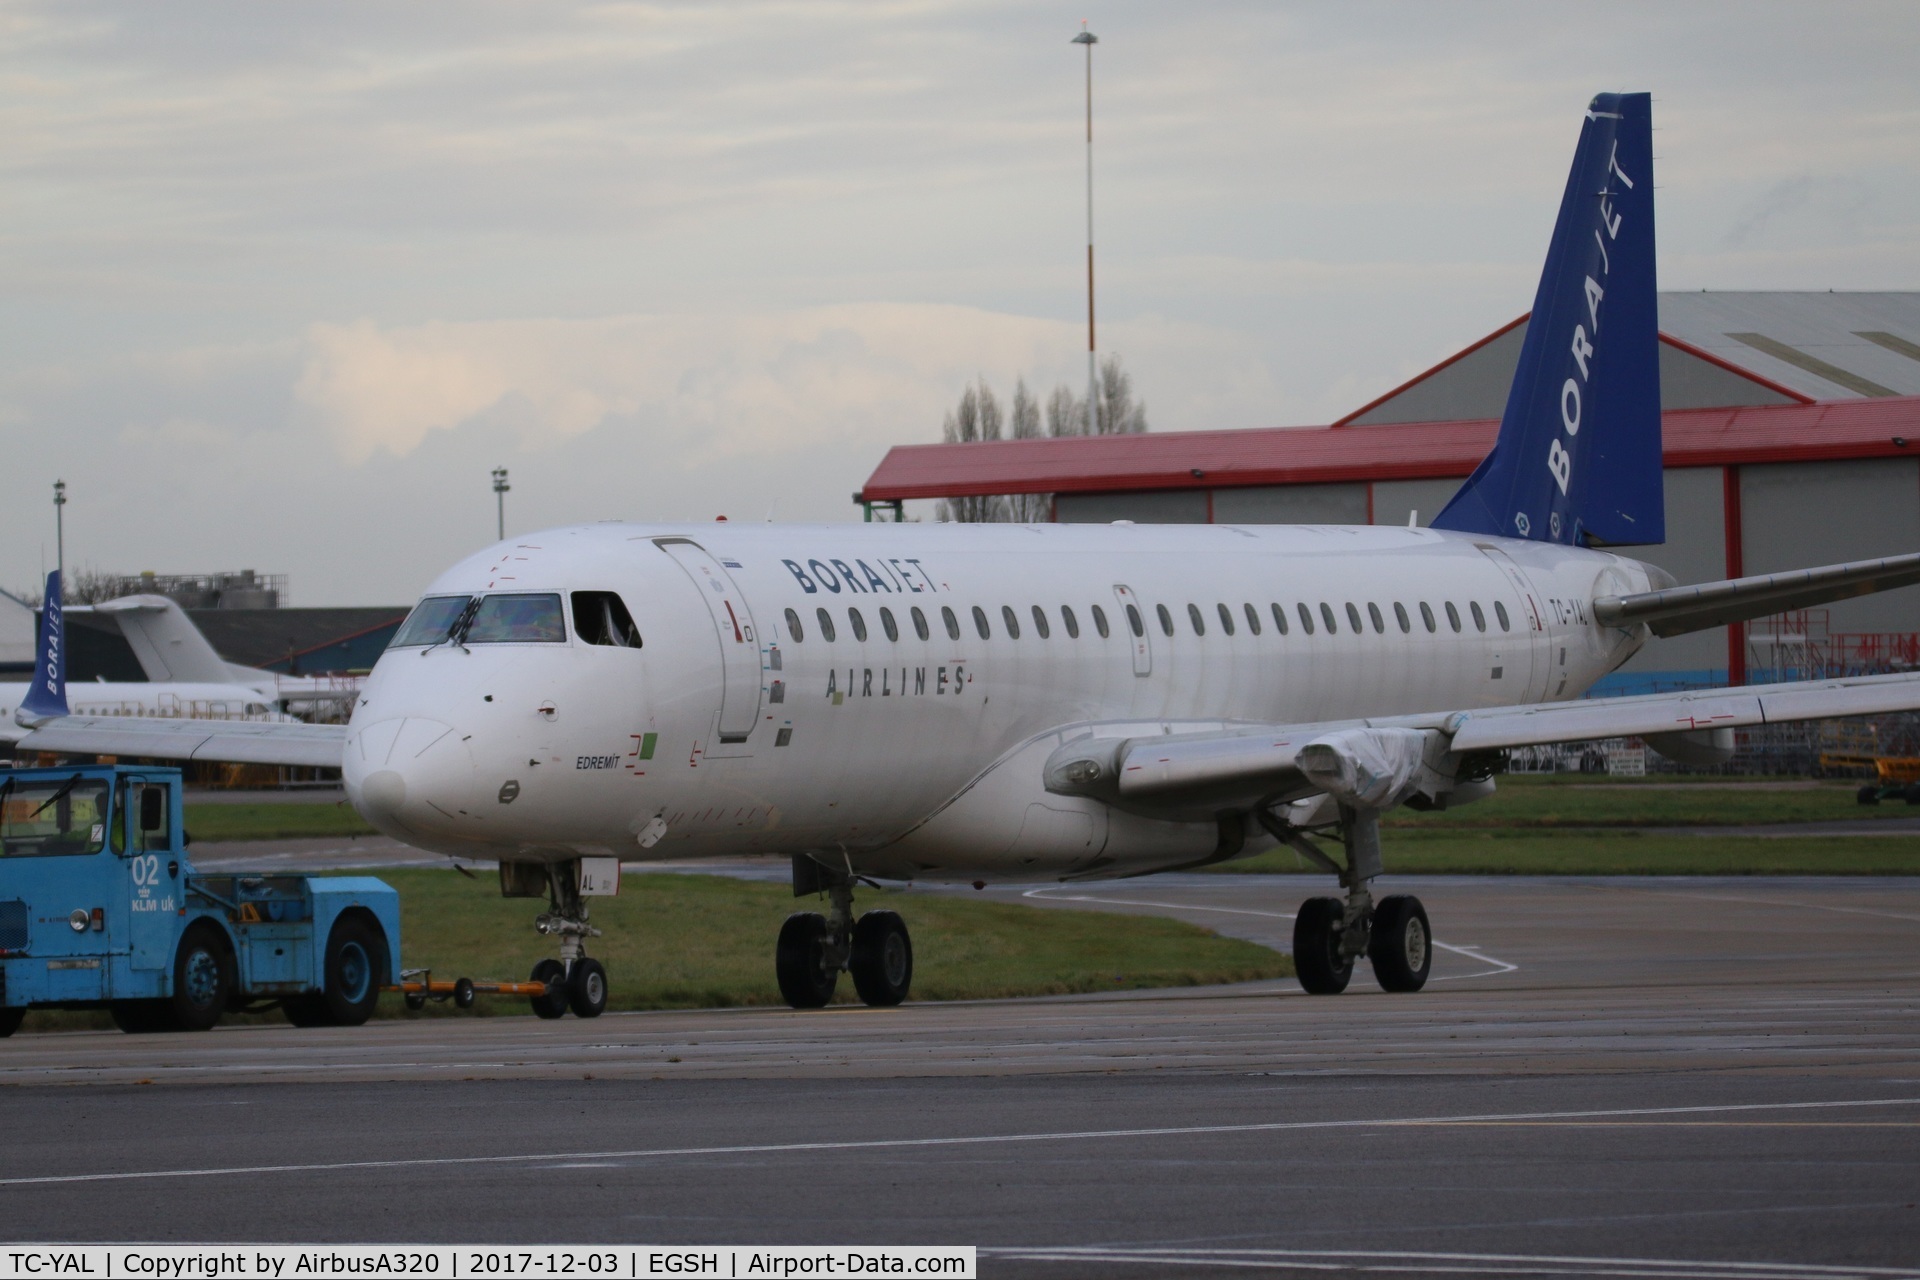 TC-YAL, 2008 Embraer 190LR (ERJ-190-100LR) C/N 19000227, Since arriving in October 2016 this has slowly been loosing parts, and it seems very unlikely to fly out again
Previously operated by Turkish operator Borajett who have since ceased operations